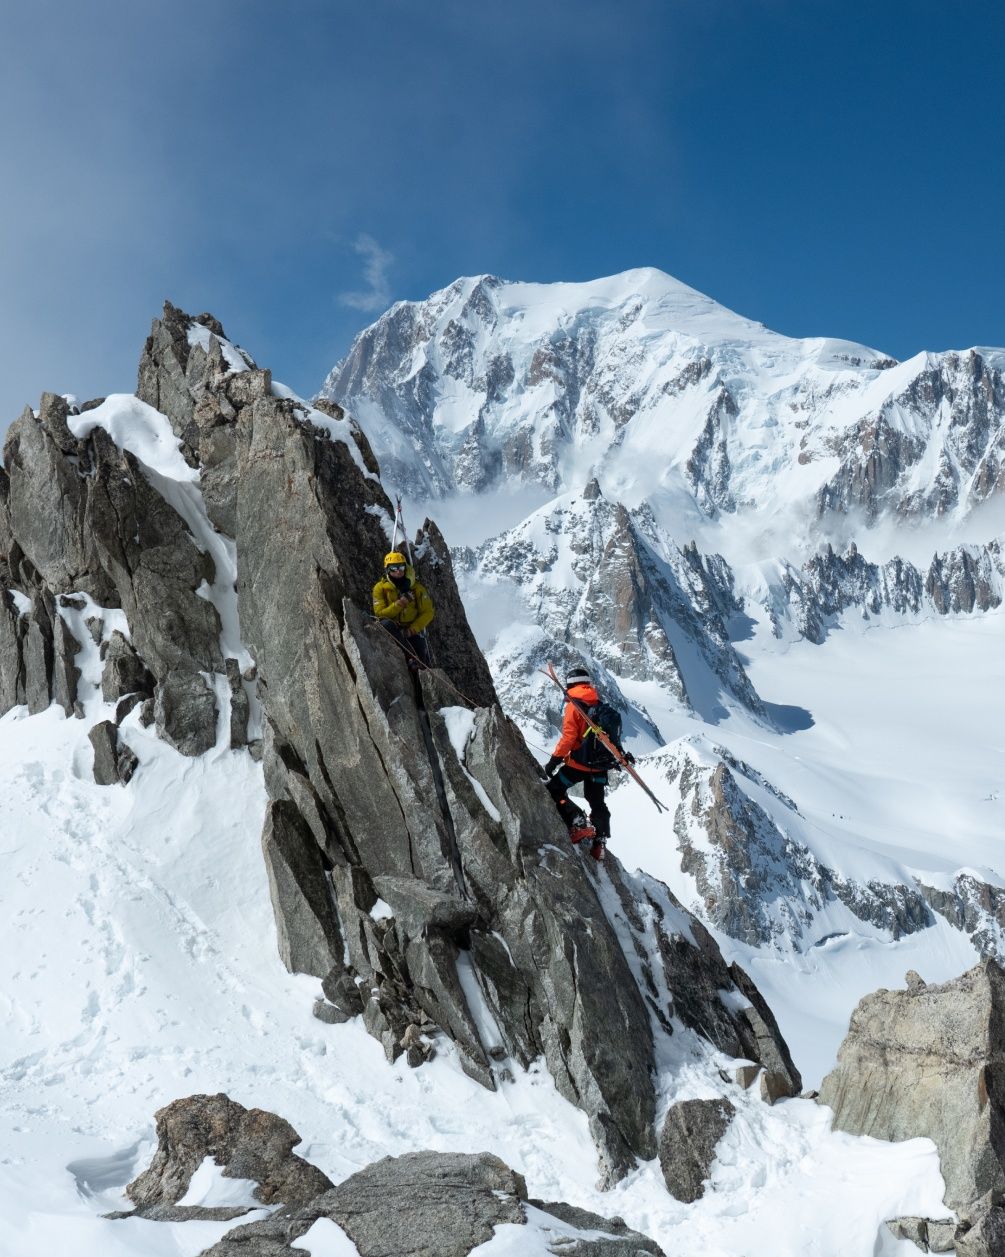 Two people with skis strapped to their backs climb a rocky mountain.